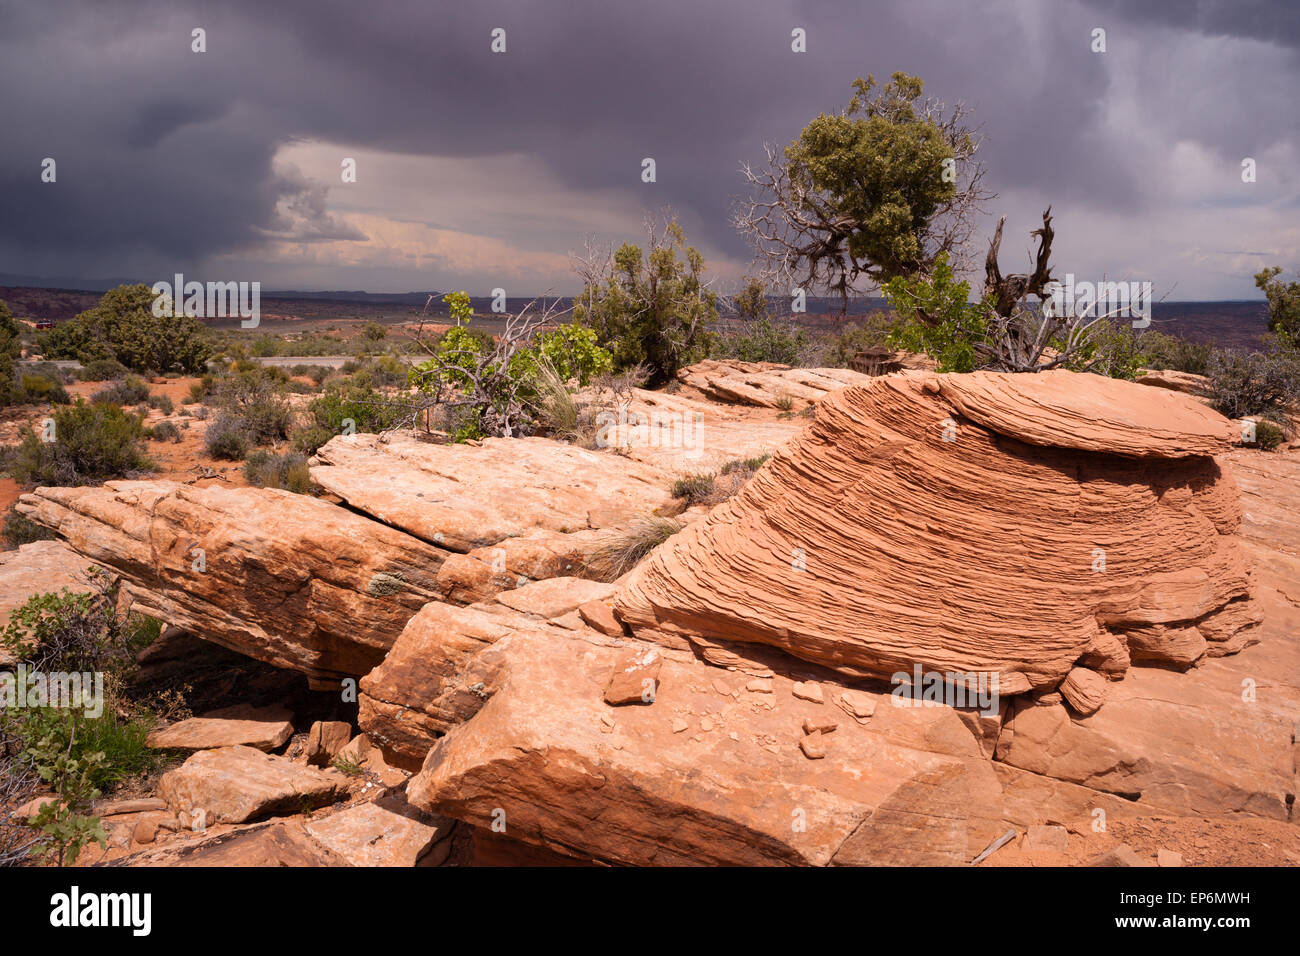 A compostion of rock outcroppings and trees before it rains in the Utah Wilds Stock Photo